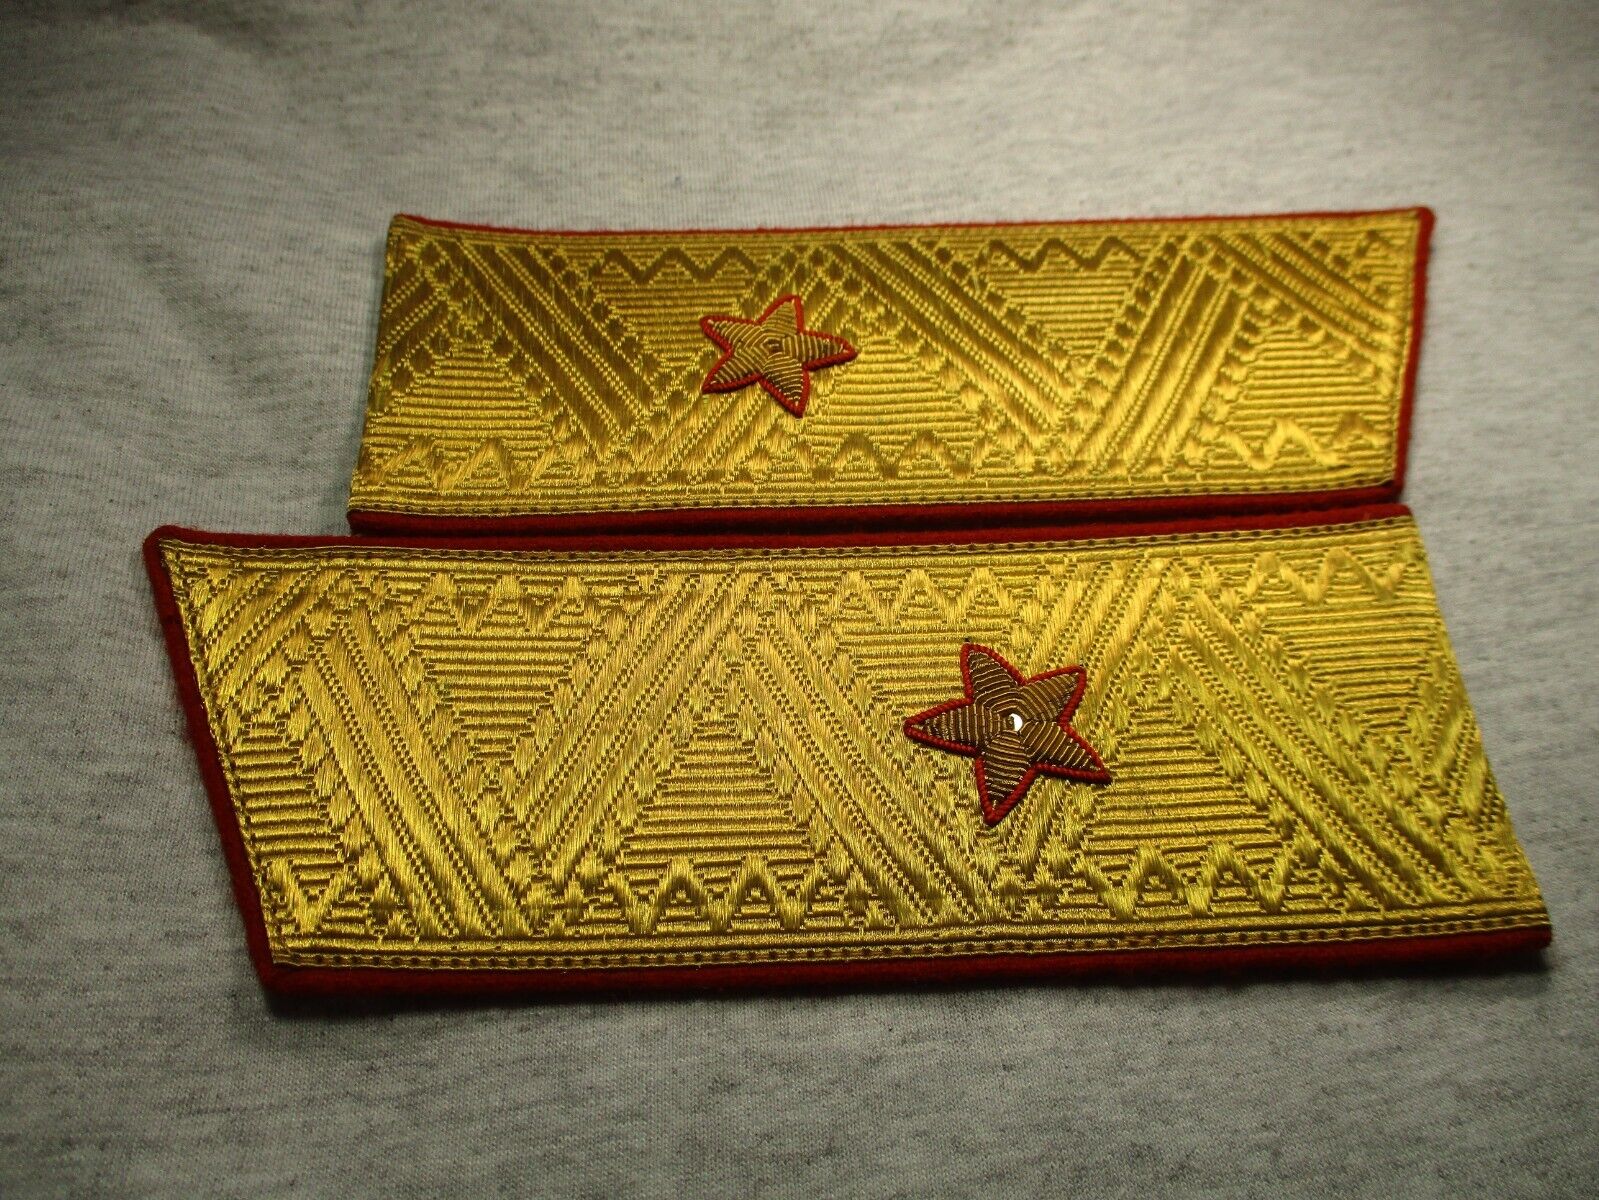 Soviet Russian USSR Army GENERAL Parade Gold Color shoulder boards 1980